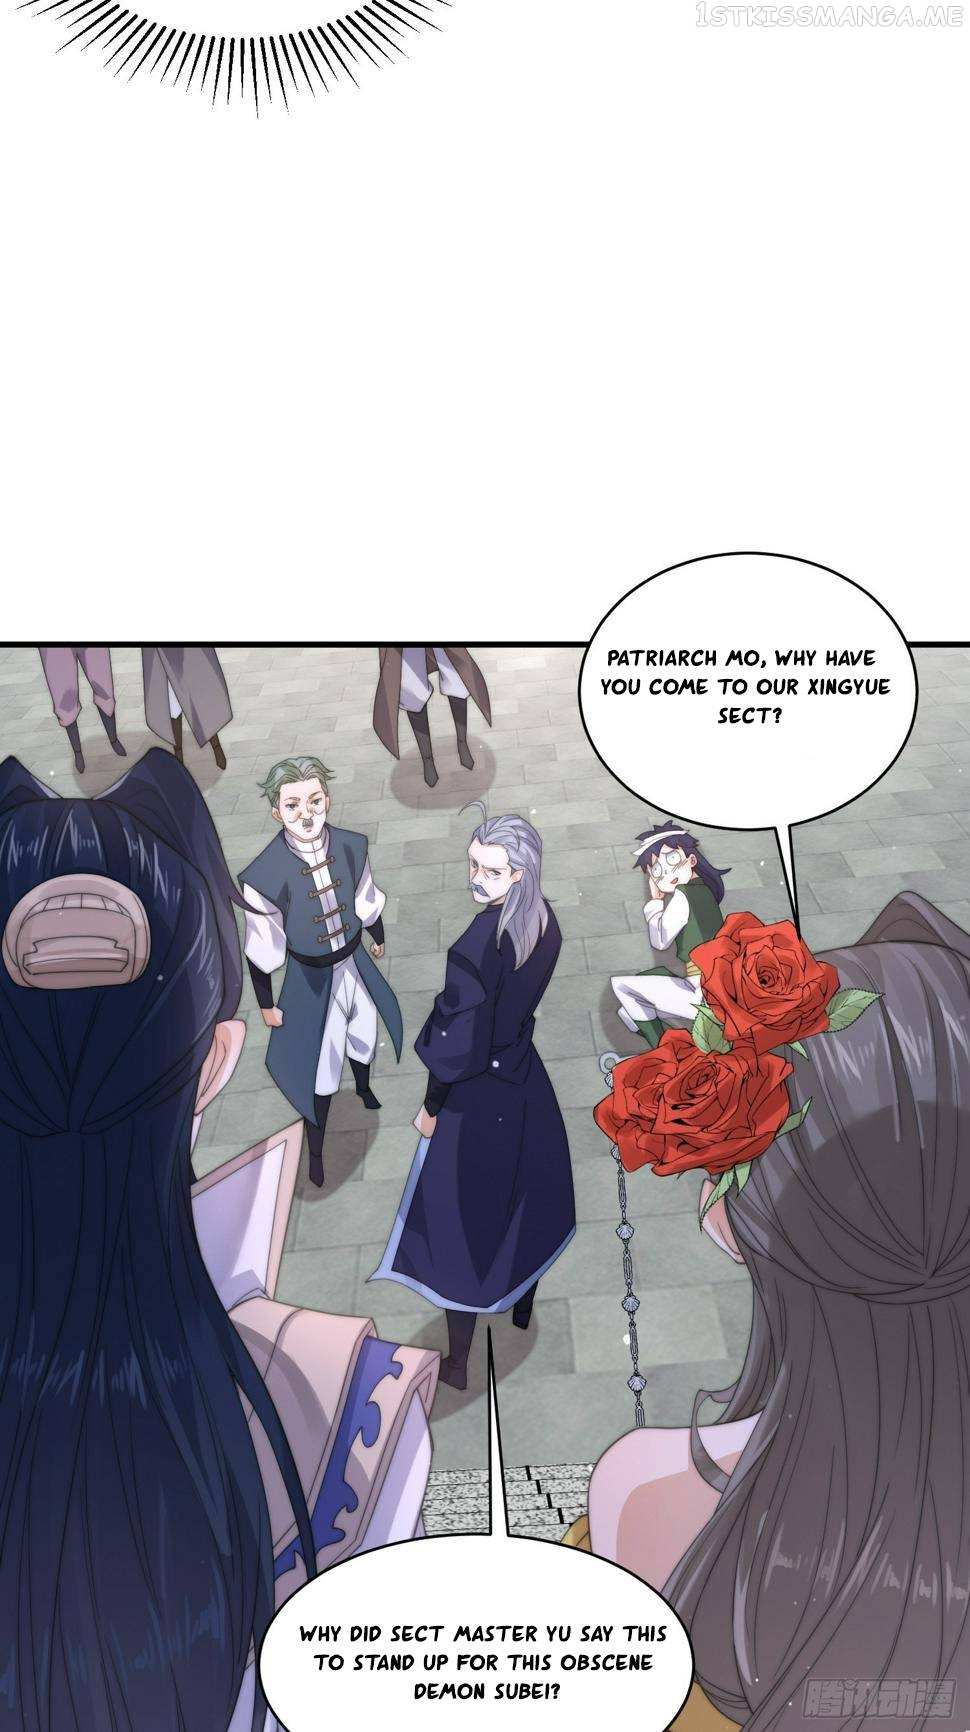 All the Female Apprentices Want to Kill Me Chapter 22